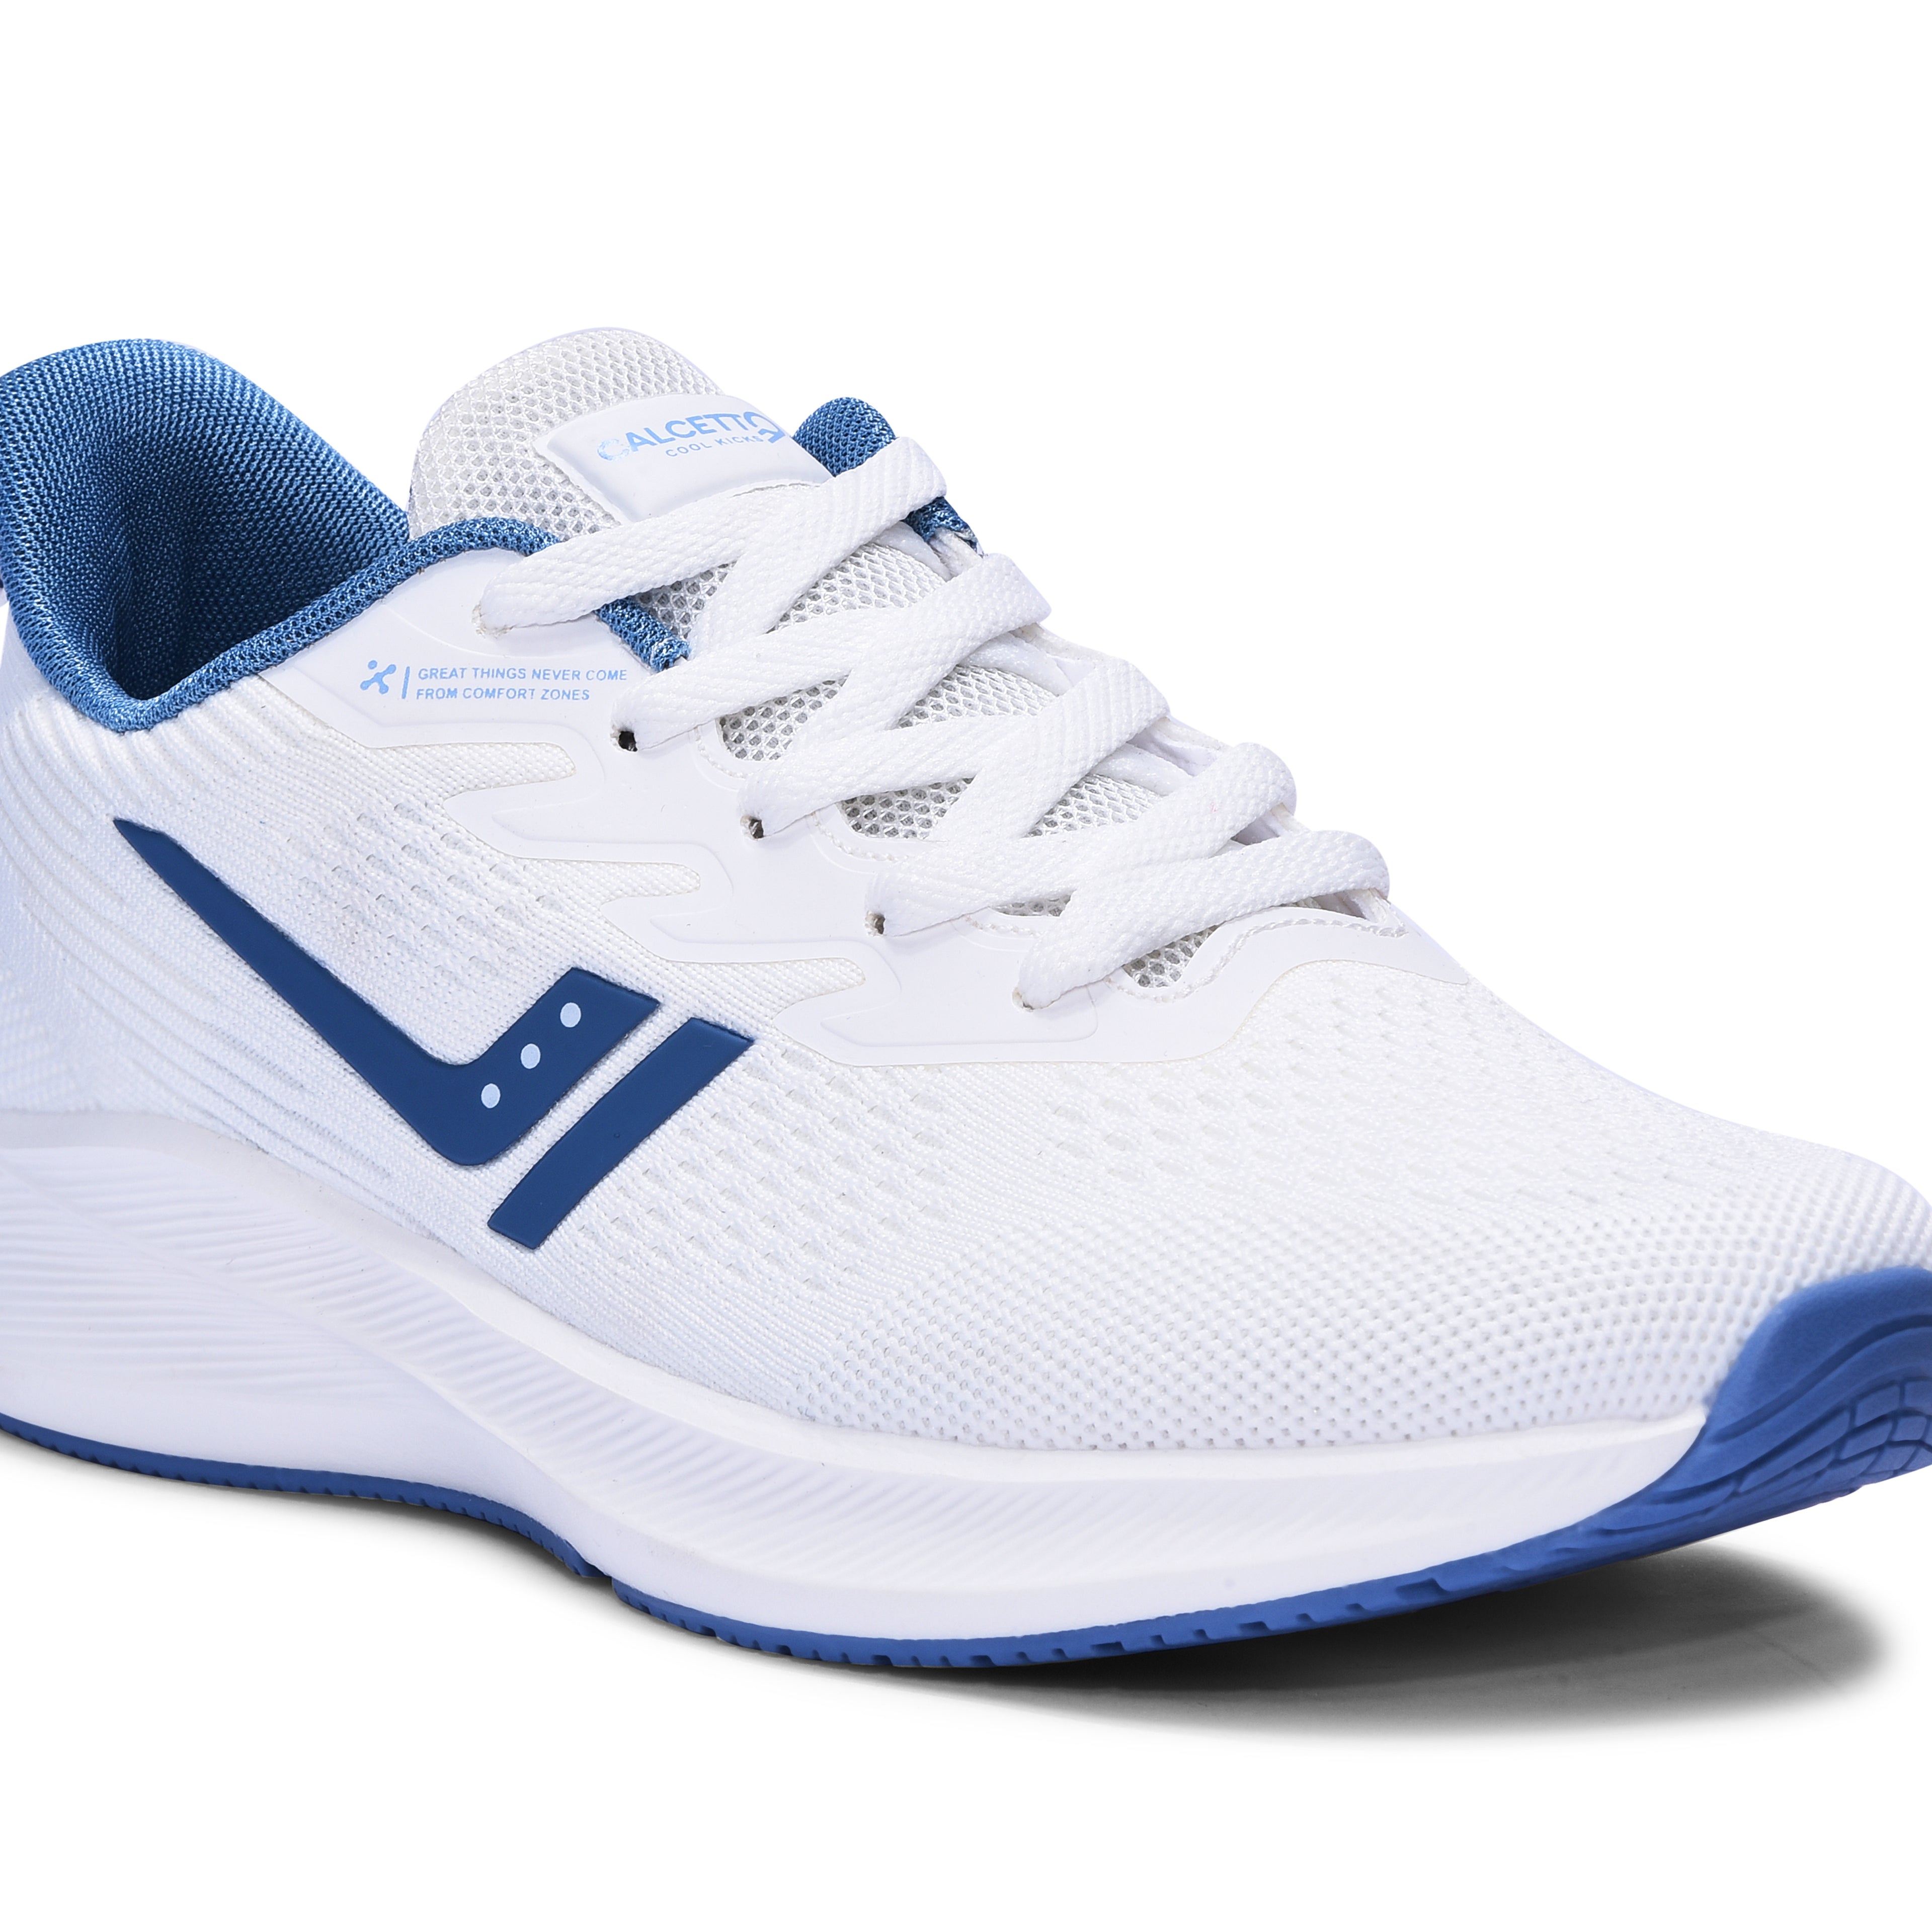 Calcetto CLT-0964 White Running Shoe For Men